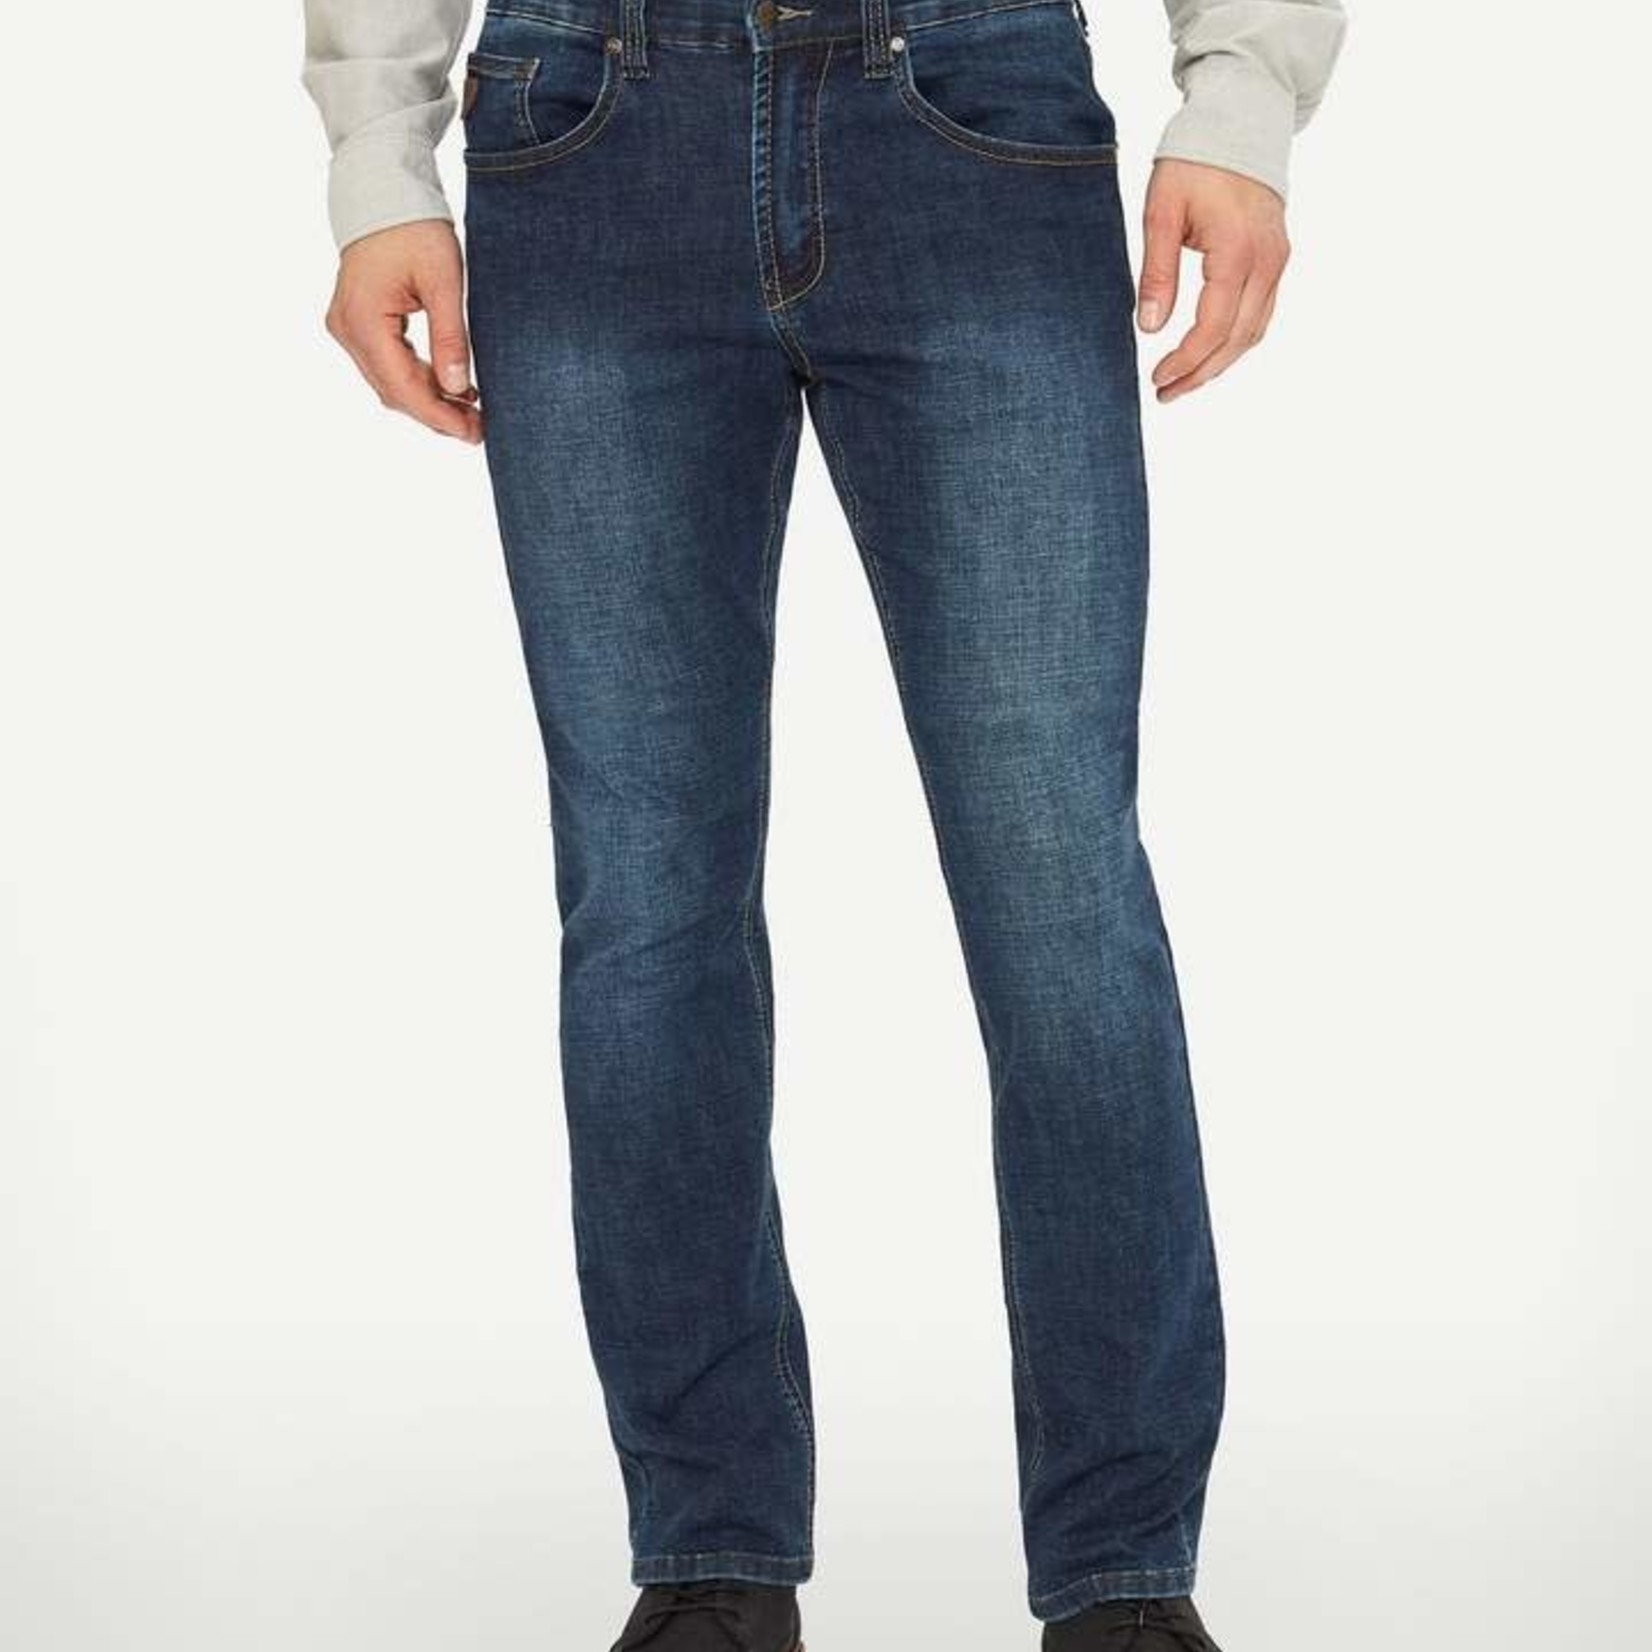 Lois Jeans Canada The "Brad Slim 6378" by Lois Jeans